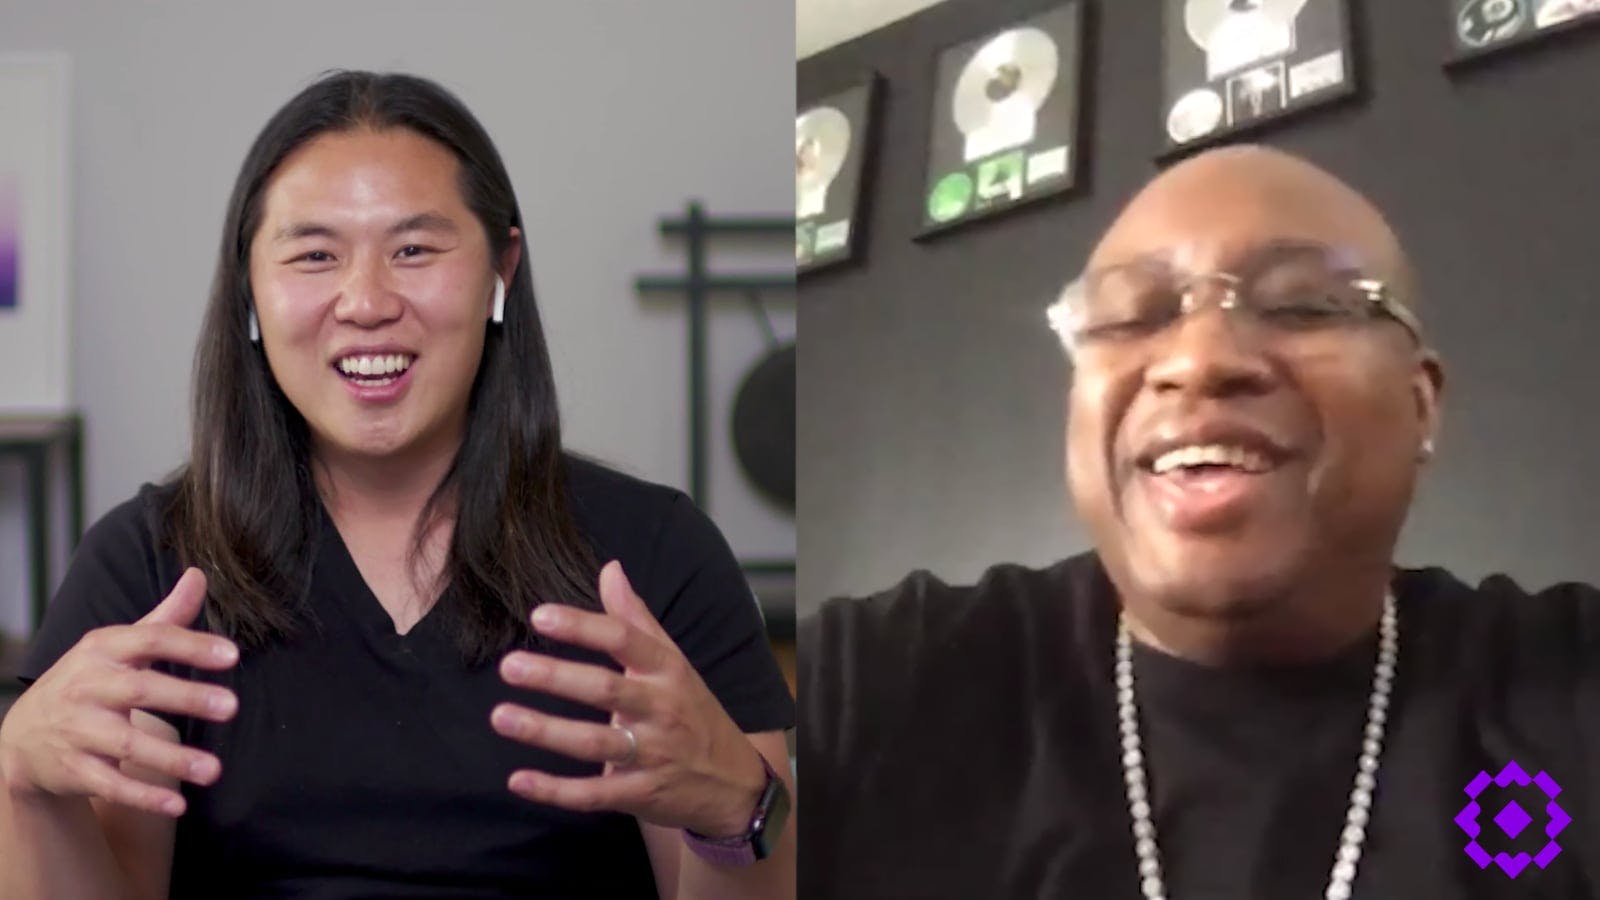 Meadow CEO David Hua and Legendary Rapper E-40 in a video interview